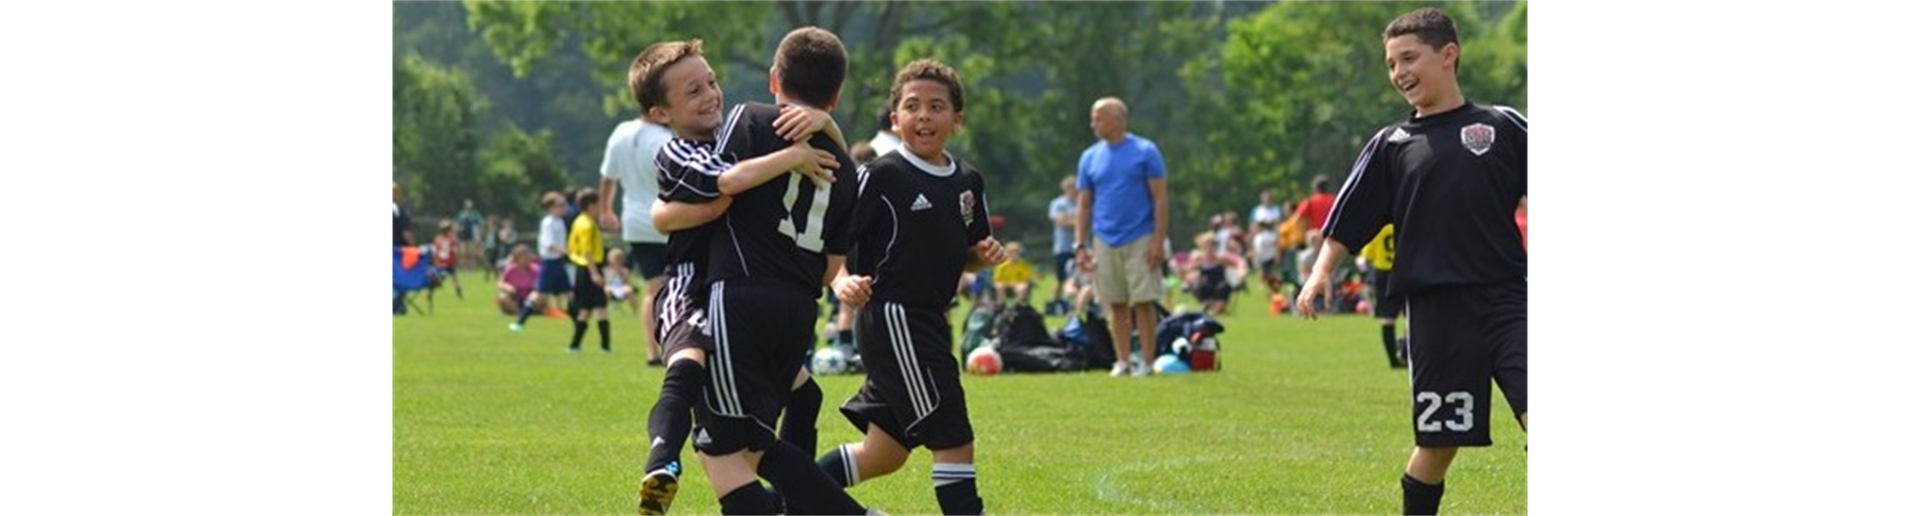 REGISTER NOW for Travel Soccer Tryouts